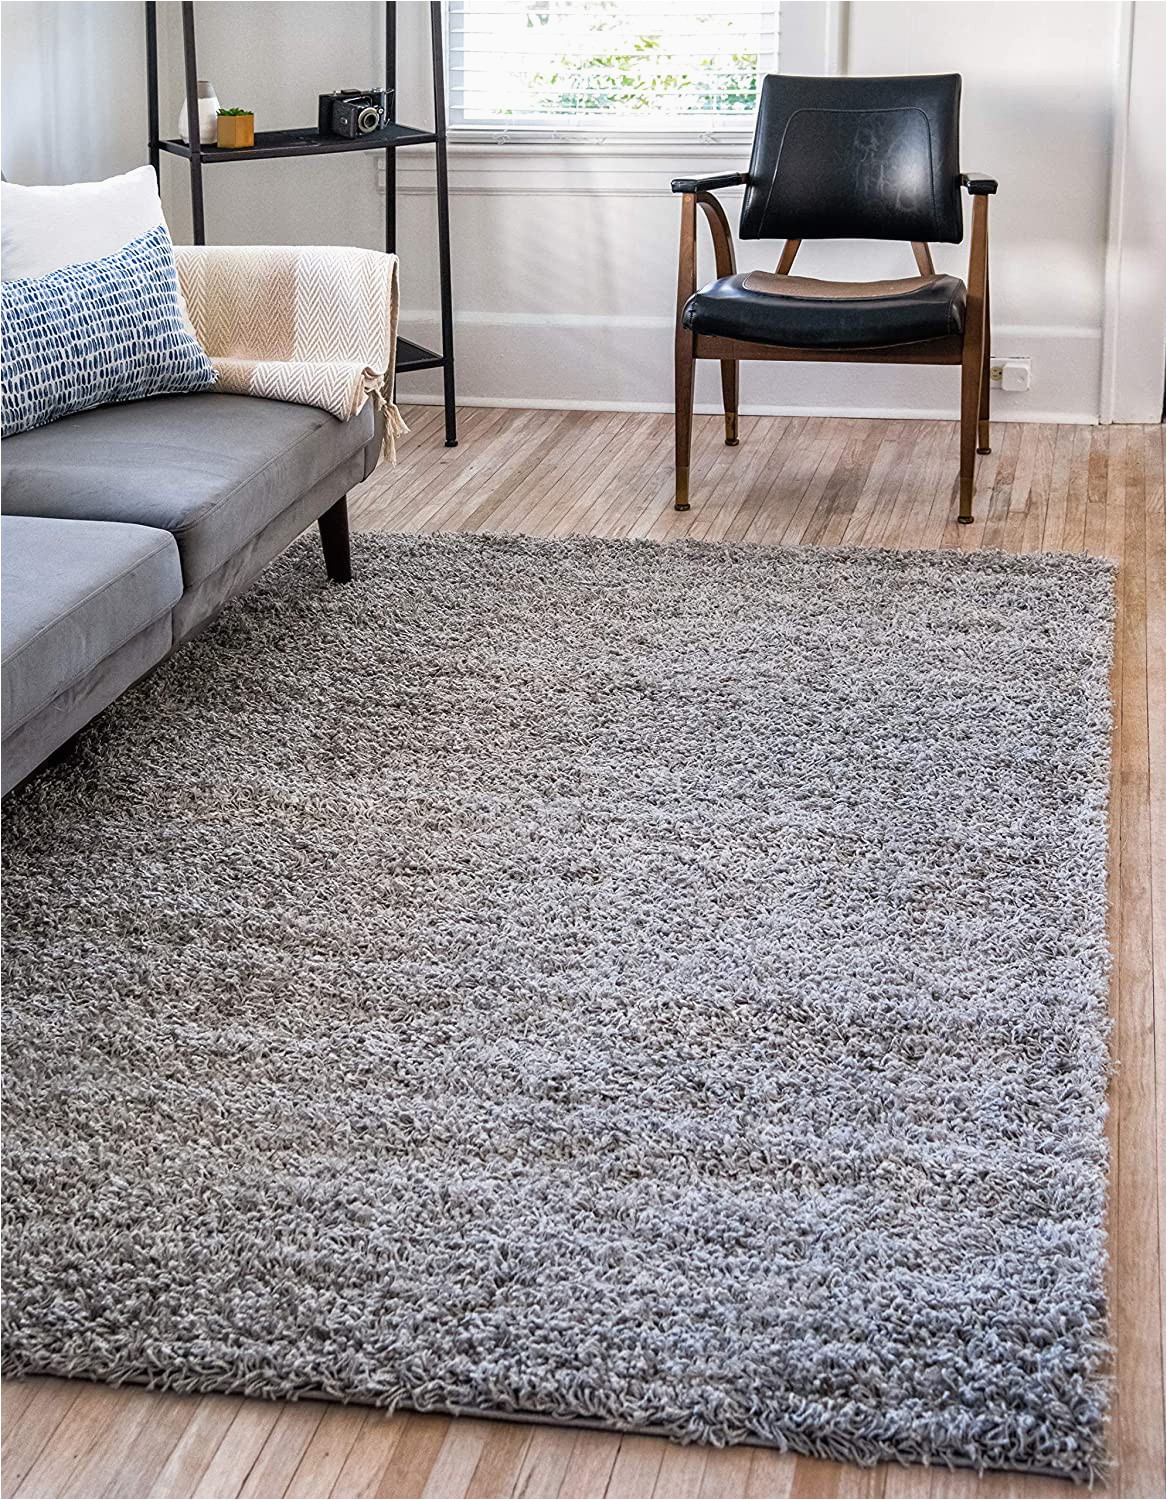 Large Children S area Rugs Unique Loom solo solid Shag Collection Modern Plush Cloud Gray area Rug 5 0 X 8 0